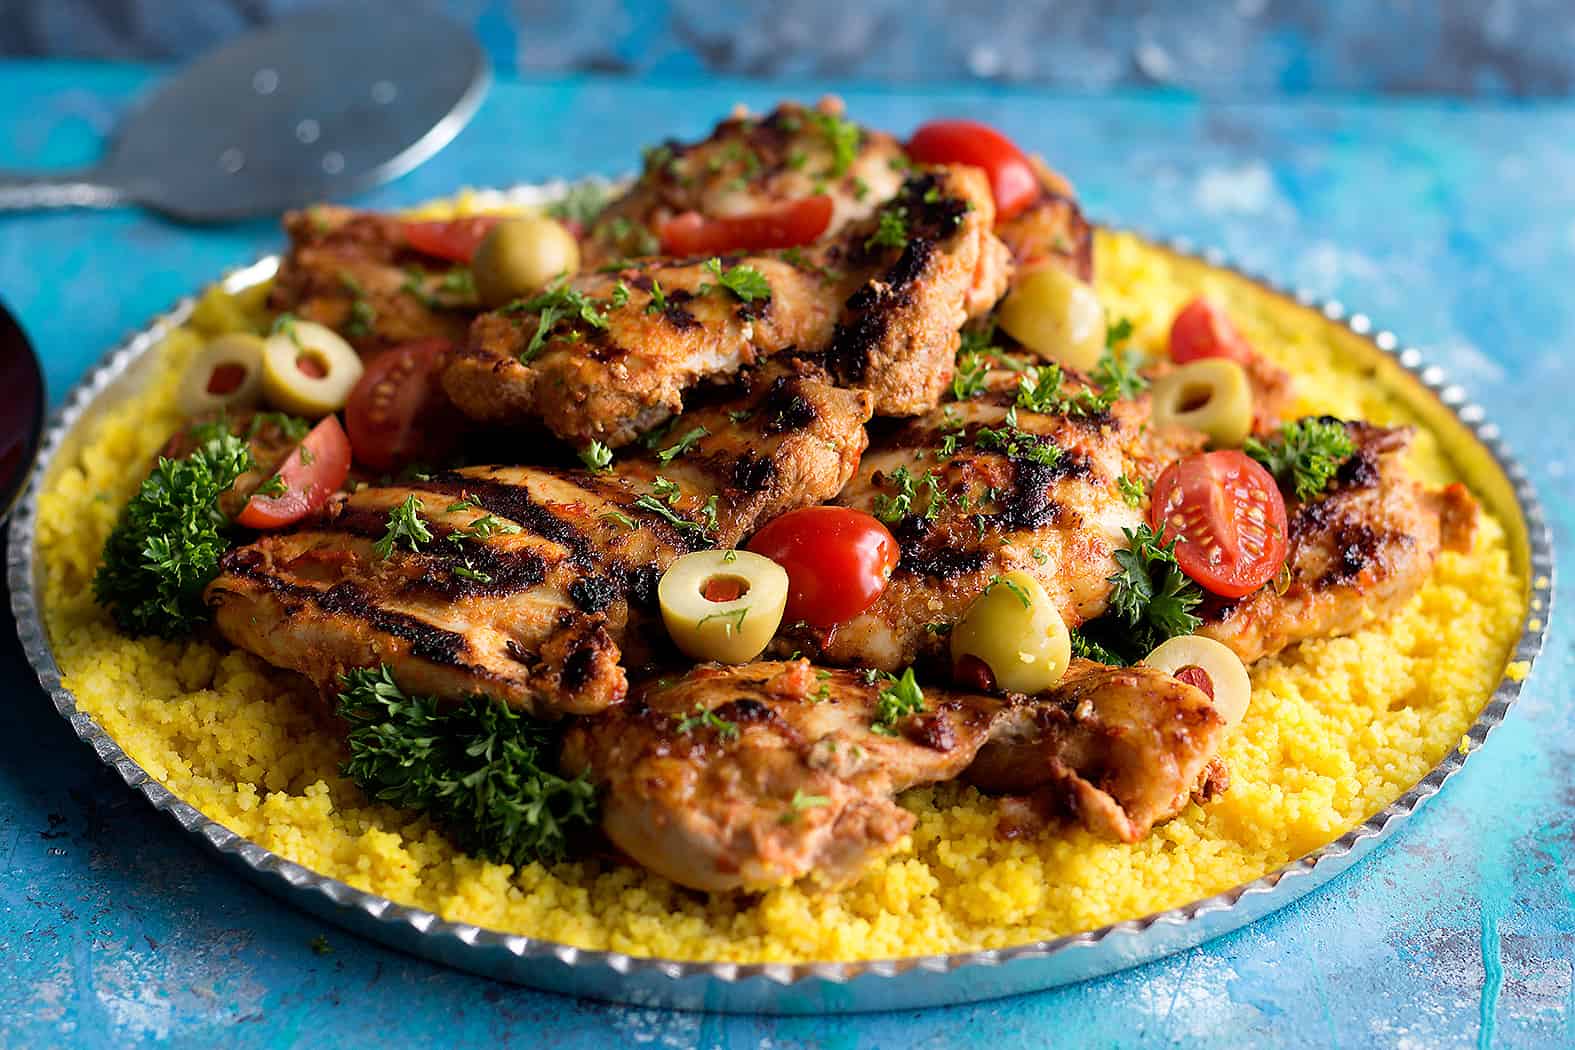 This delicious harissa chicken is the perfect weeknight meal served with saffron infused couscous. Learn how to make this spicy chicken recipe with a twist. 
